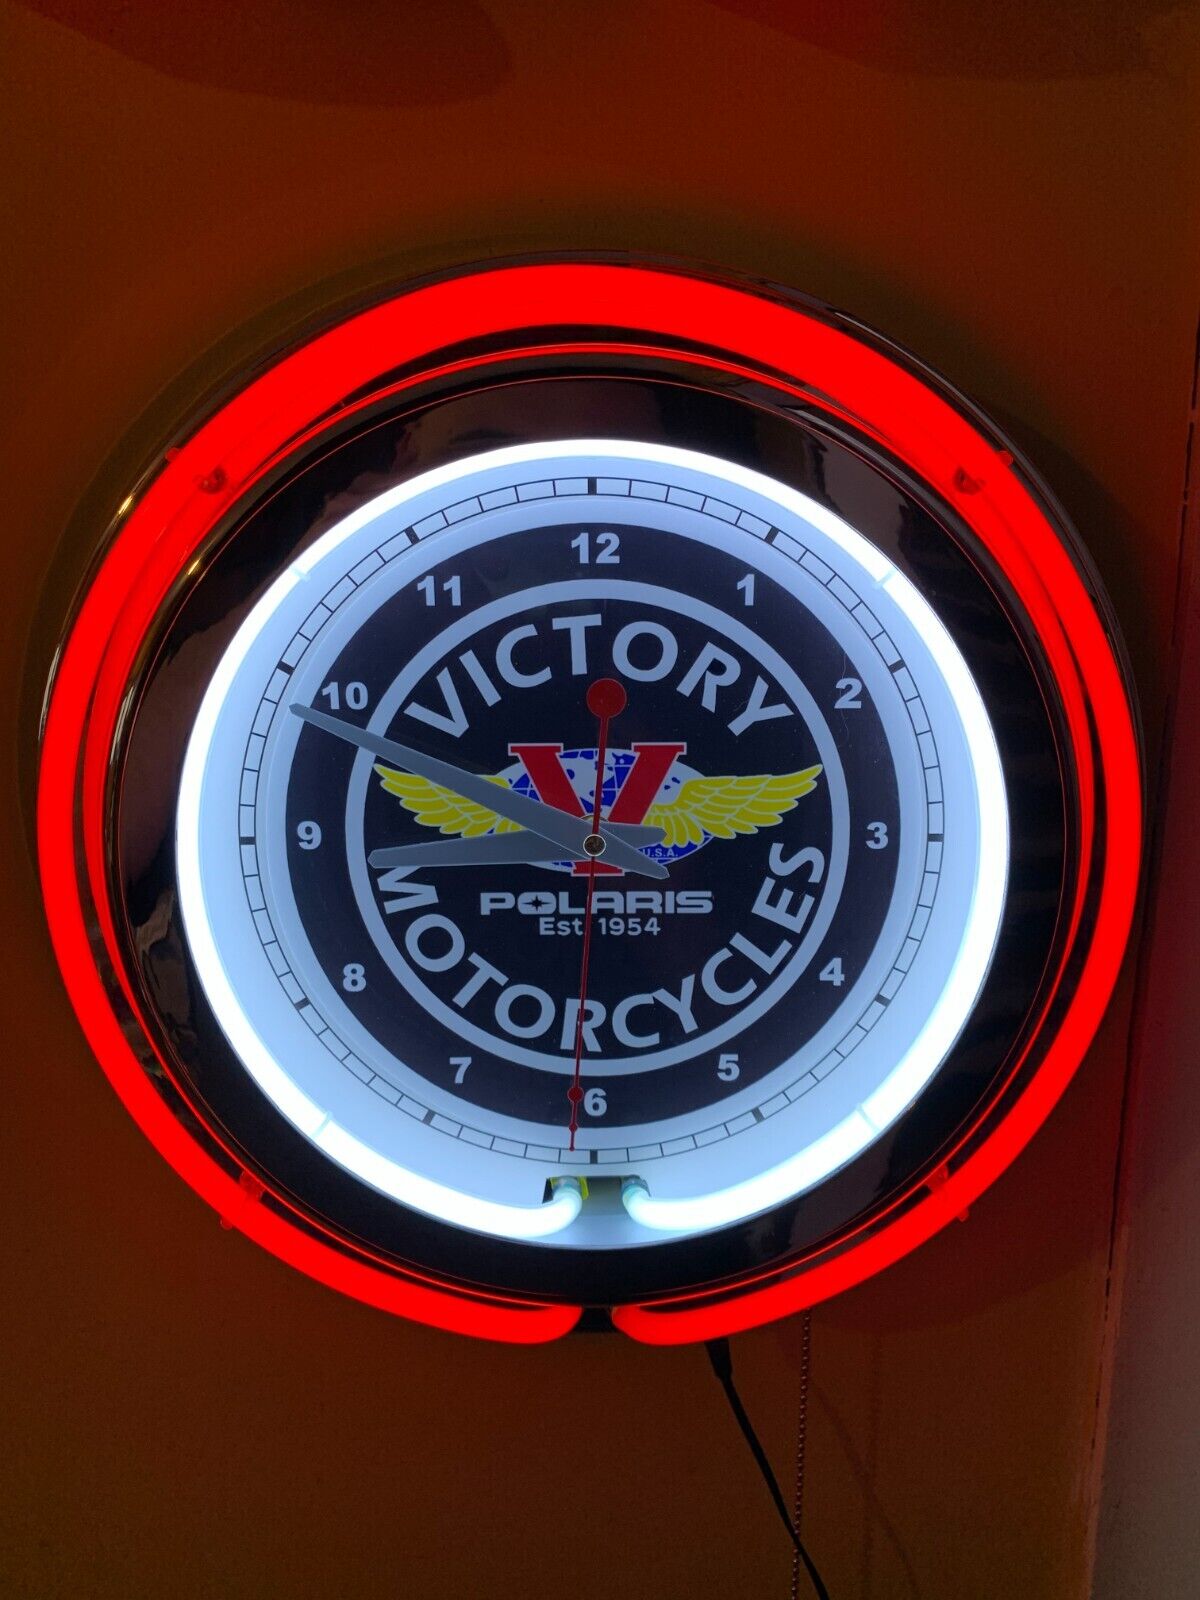 Victory Motorcycle Garage Man Cave RED Neon Wall Clock Advertising Sign